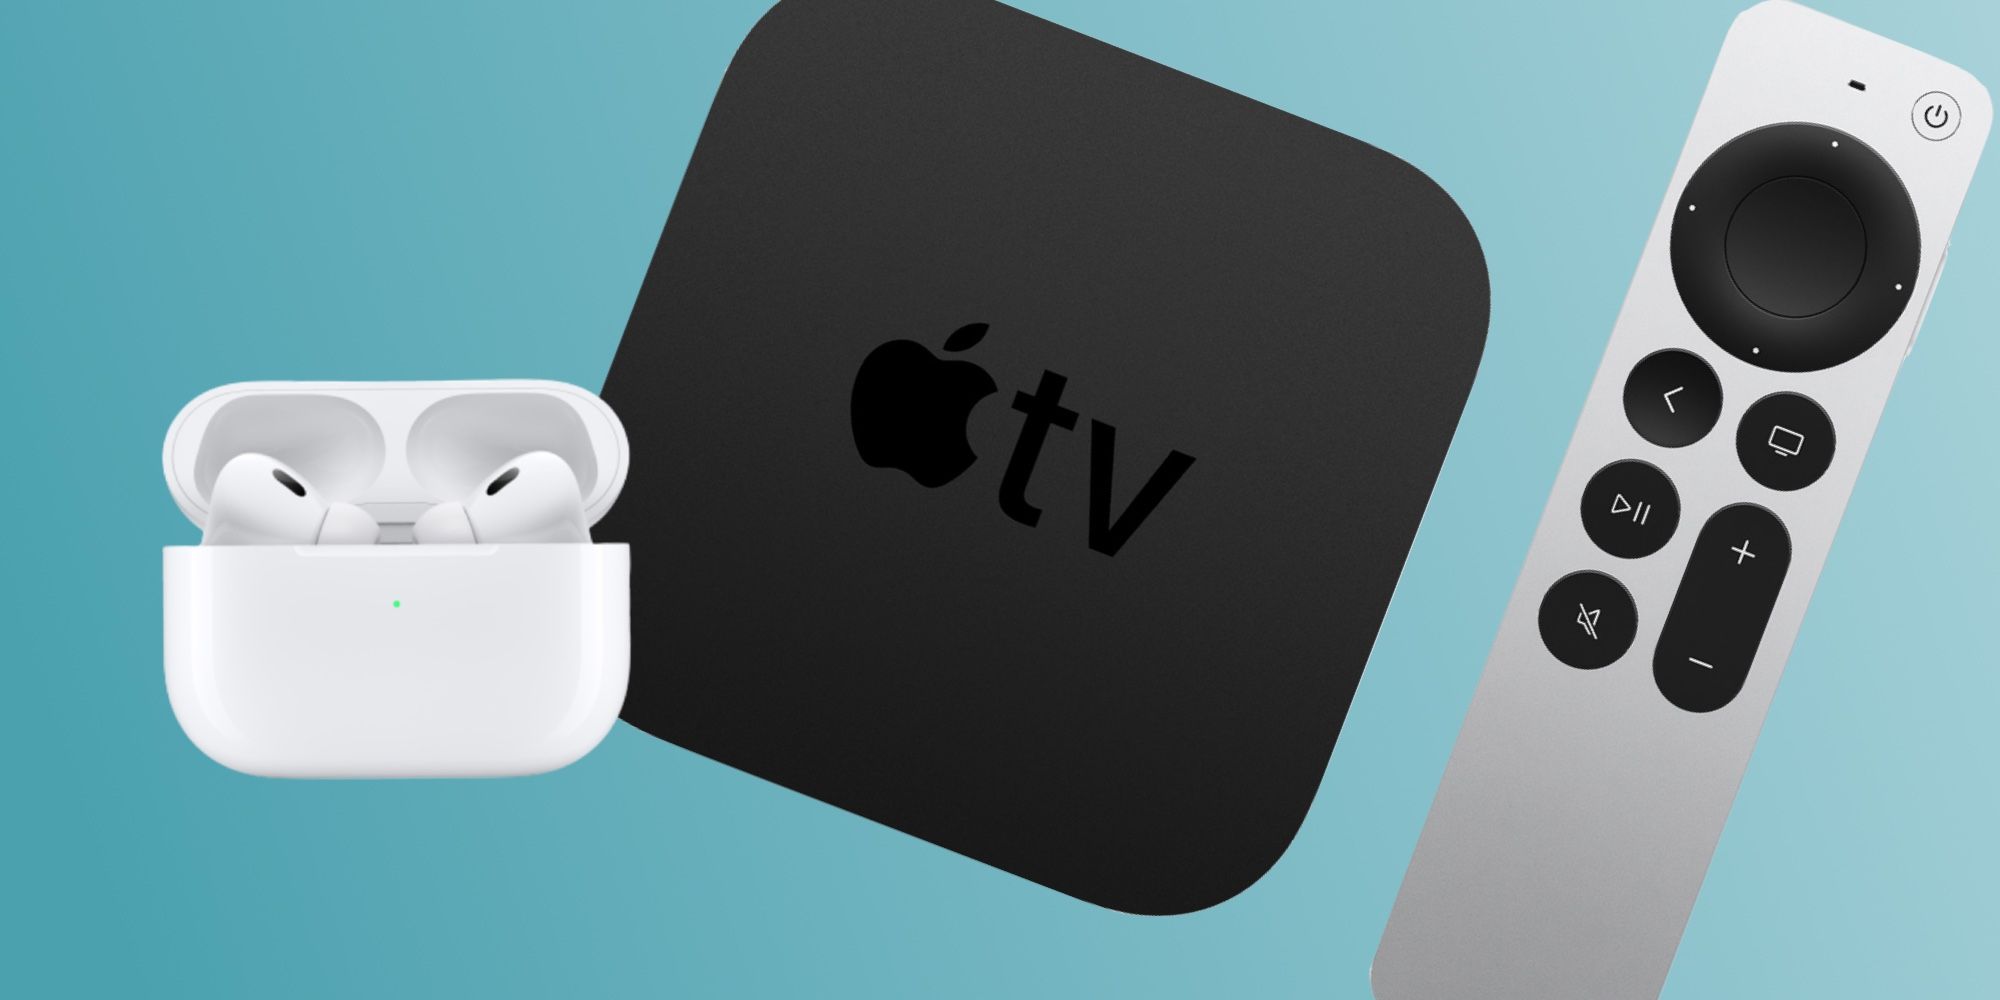 AirPods Pro next to Apple TV 4K and remote